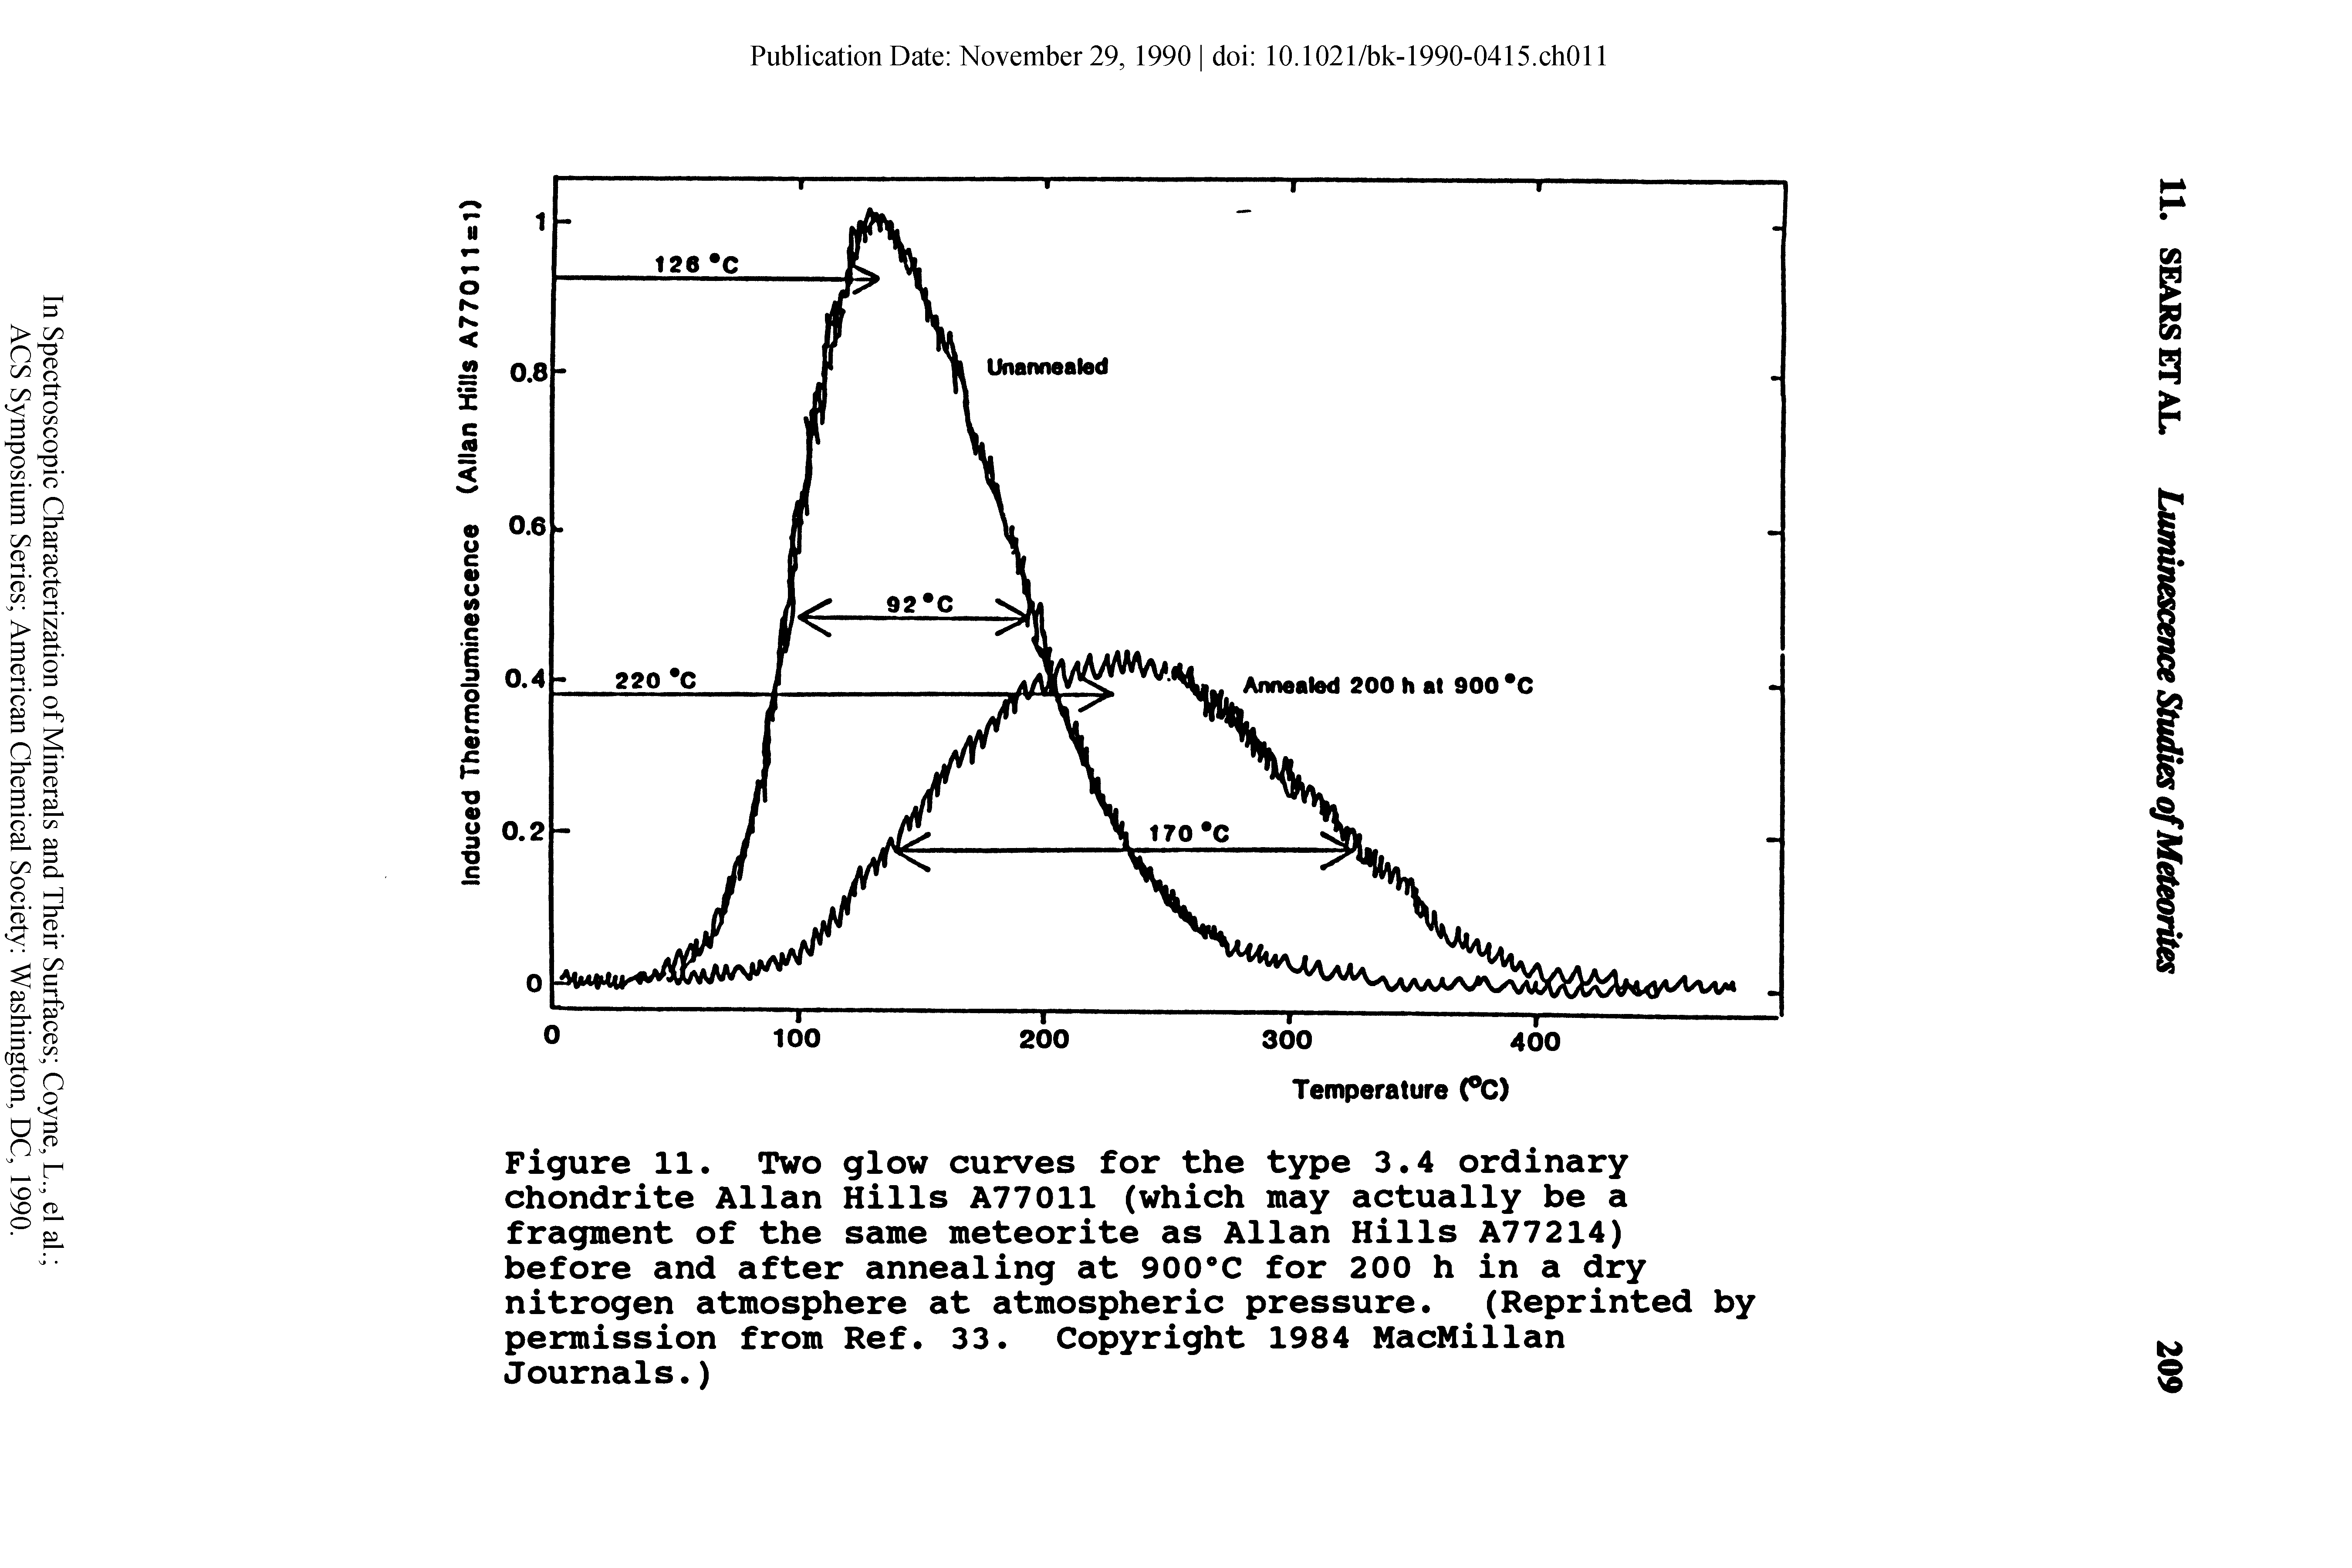 Figure 11. Two glow curves for the type 3.4 ordinary chondrite Allan Hills A77011 (which may actually be a fragment of the same meteorite as Allan Hills A77214) before and after annealing at 900°C for 200 h in a dry nitrogen atmosphere at atmospheric pressure. (Reprinted by permission from Ref. 33. Copyright 1984 MacMillan Journals.)...